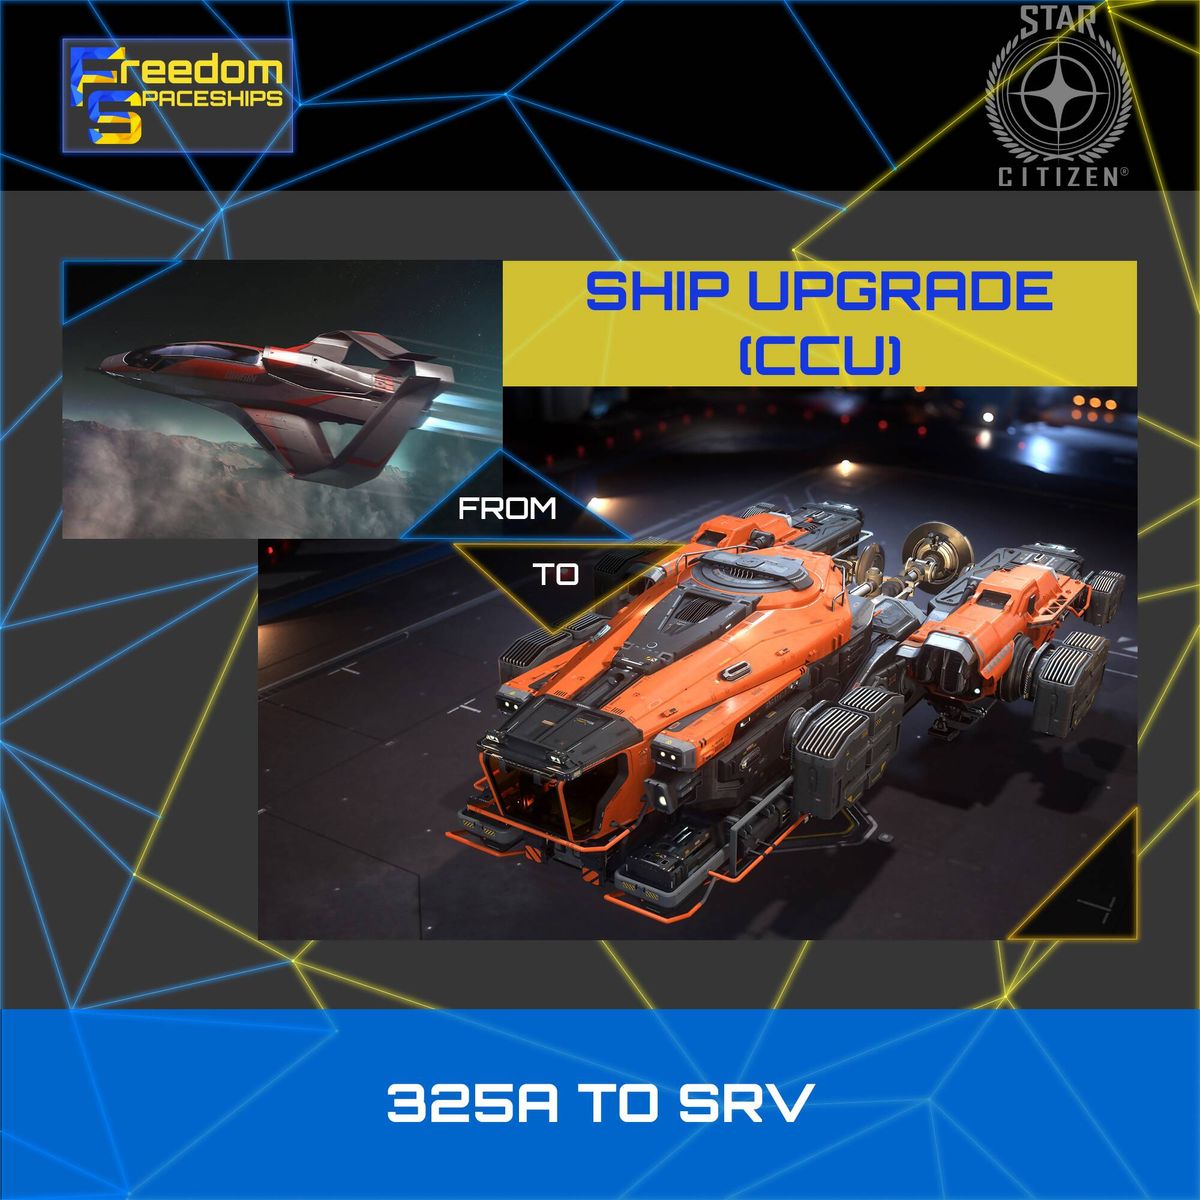 Upgrade - 325a to SRV